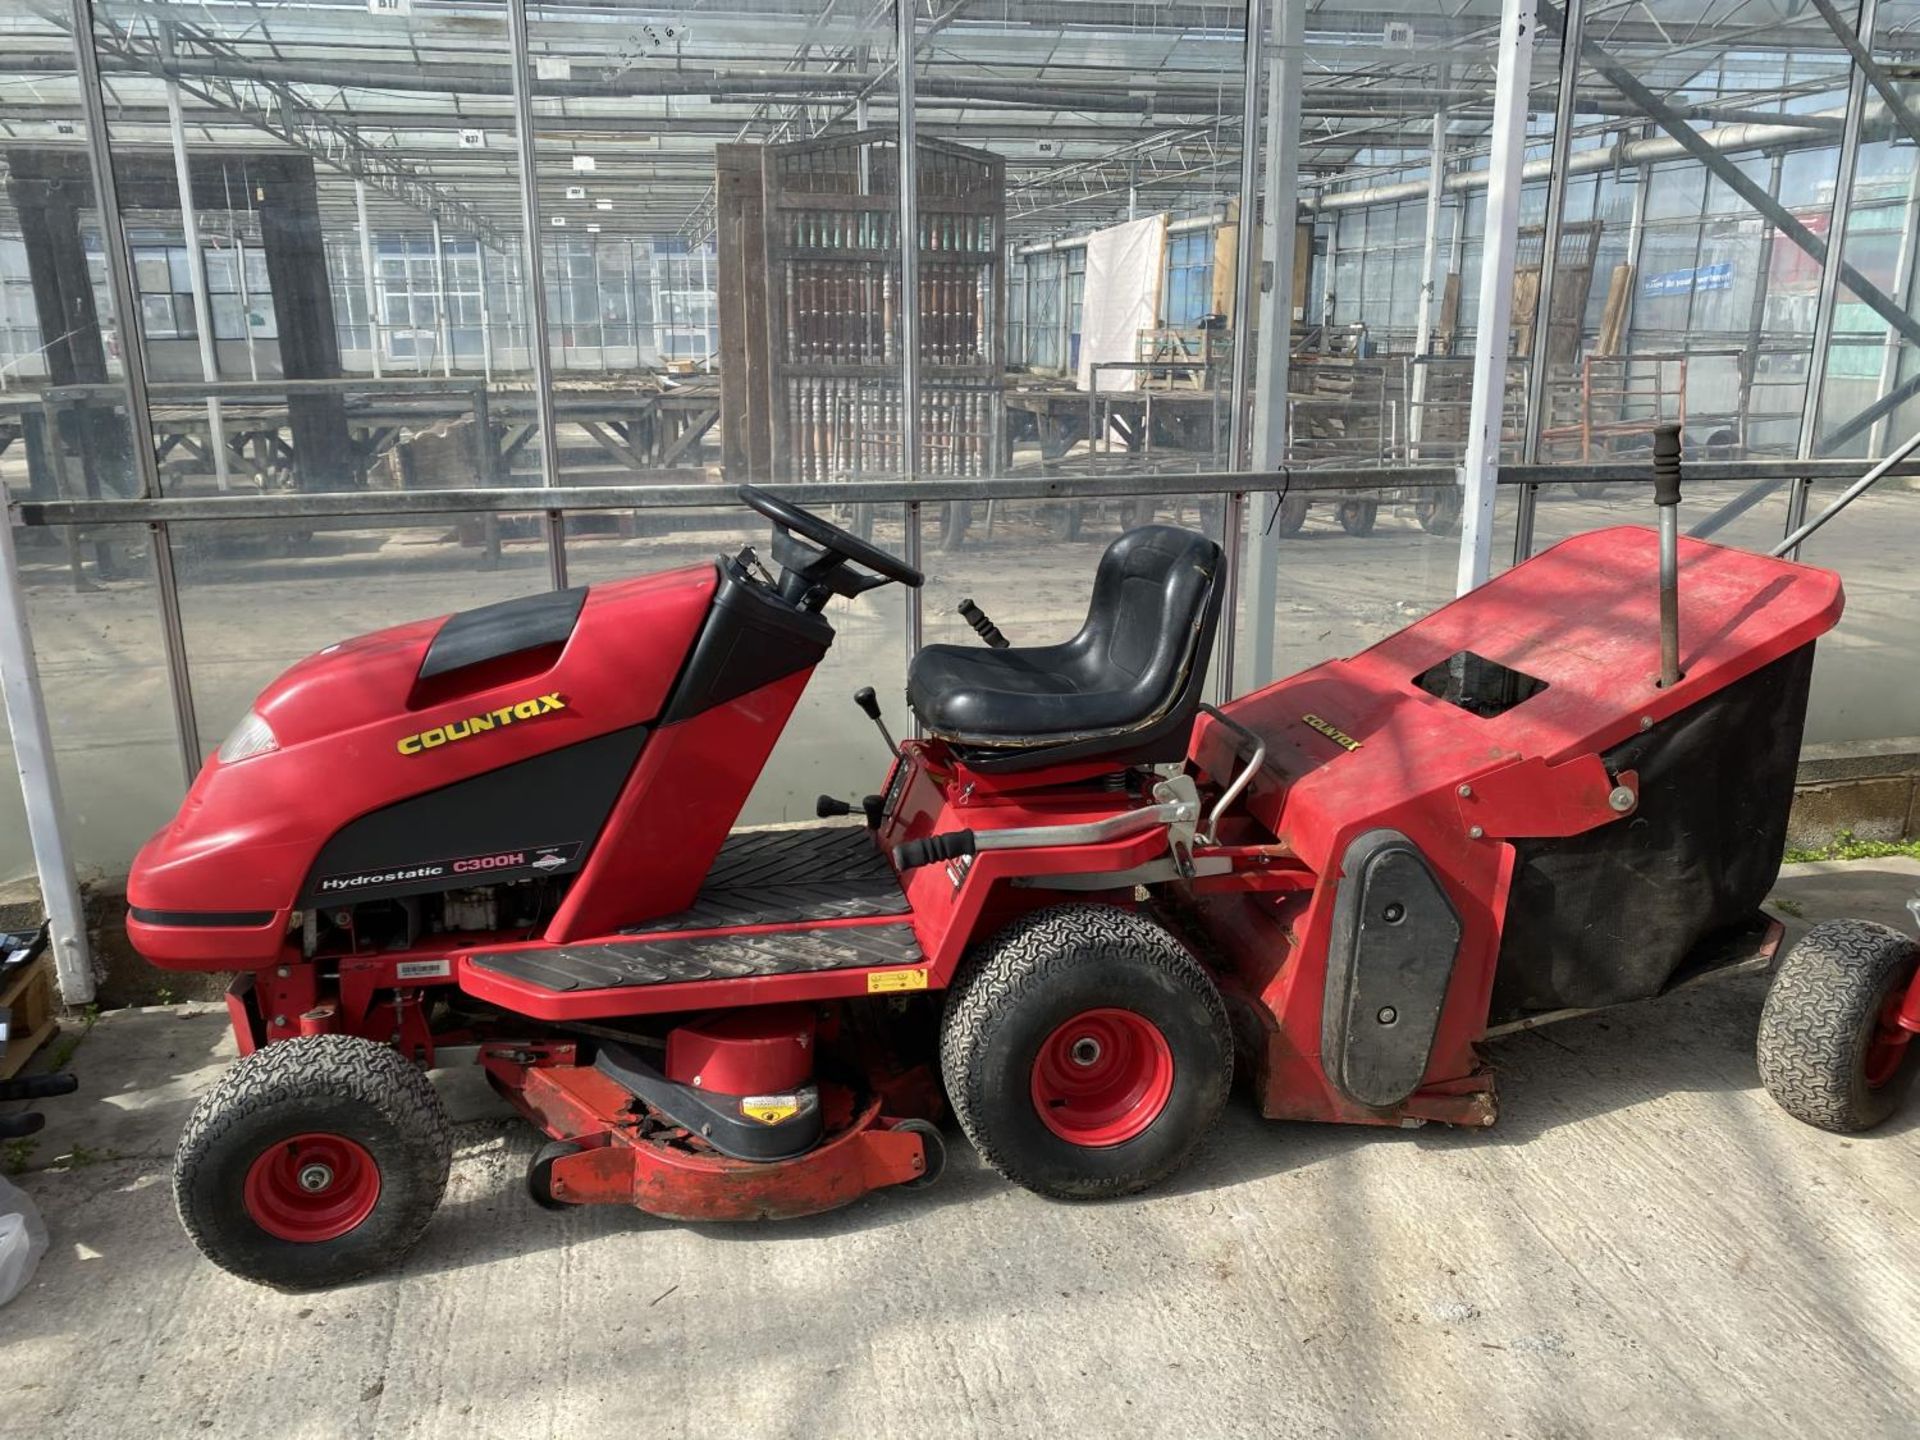 A COUNTAX HYDROSTATIC C300H RIDE ON MOWER, RUNNER - NO WARRANTY,(CUTTER NEEDS ATTENTION) NO VAT